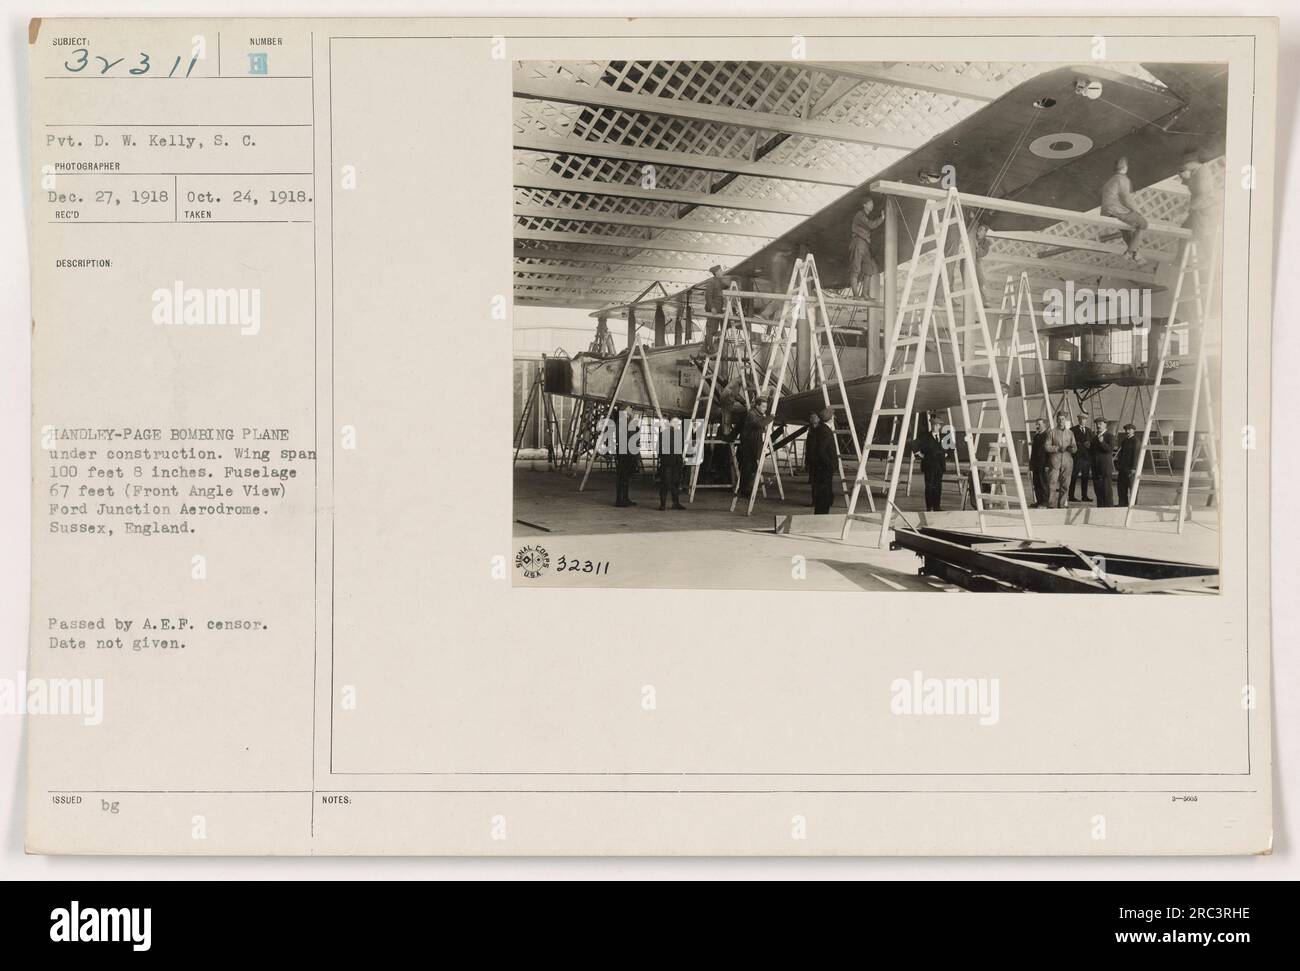 'Photograph of Handley-Page Bombing Plane under construction at Ford Junction Aerodrome, Sussex, England. The plane has a wing span of 100 feet 8 inches and a fuselage of 67 feet. Taken by Pvt. D.W. Kelly on October 24, 1918. Authorized by A.E.P. censor. Reference number 111-SC-32311. ' Stock Photo